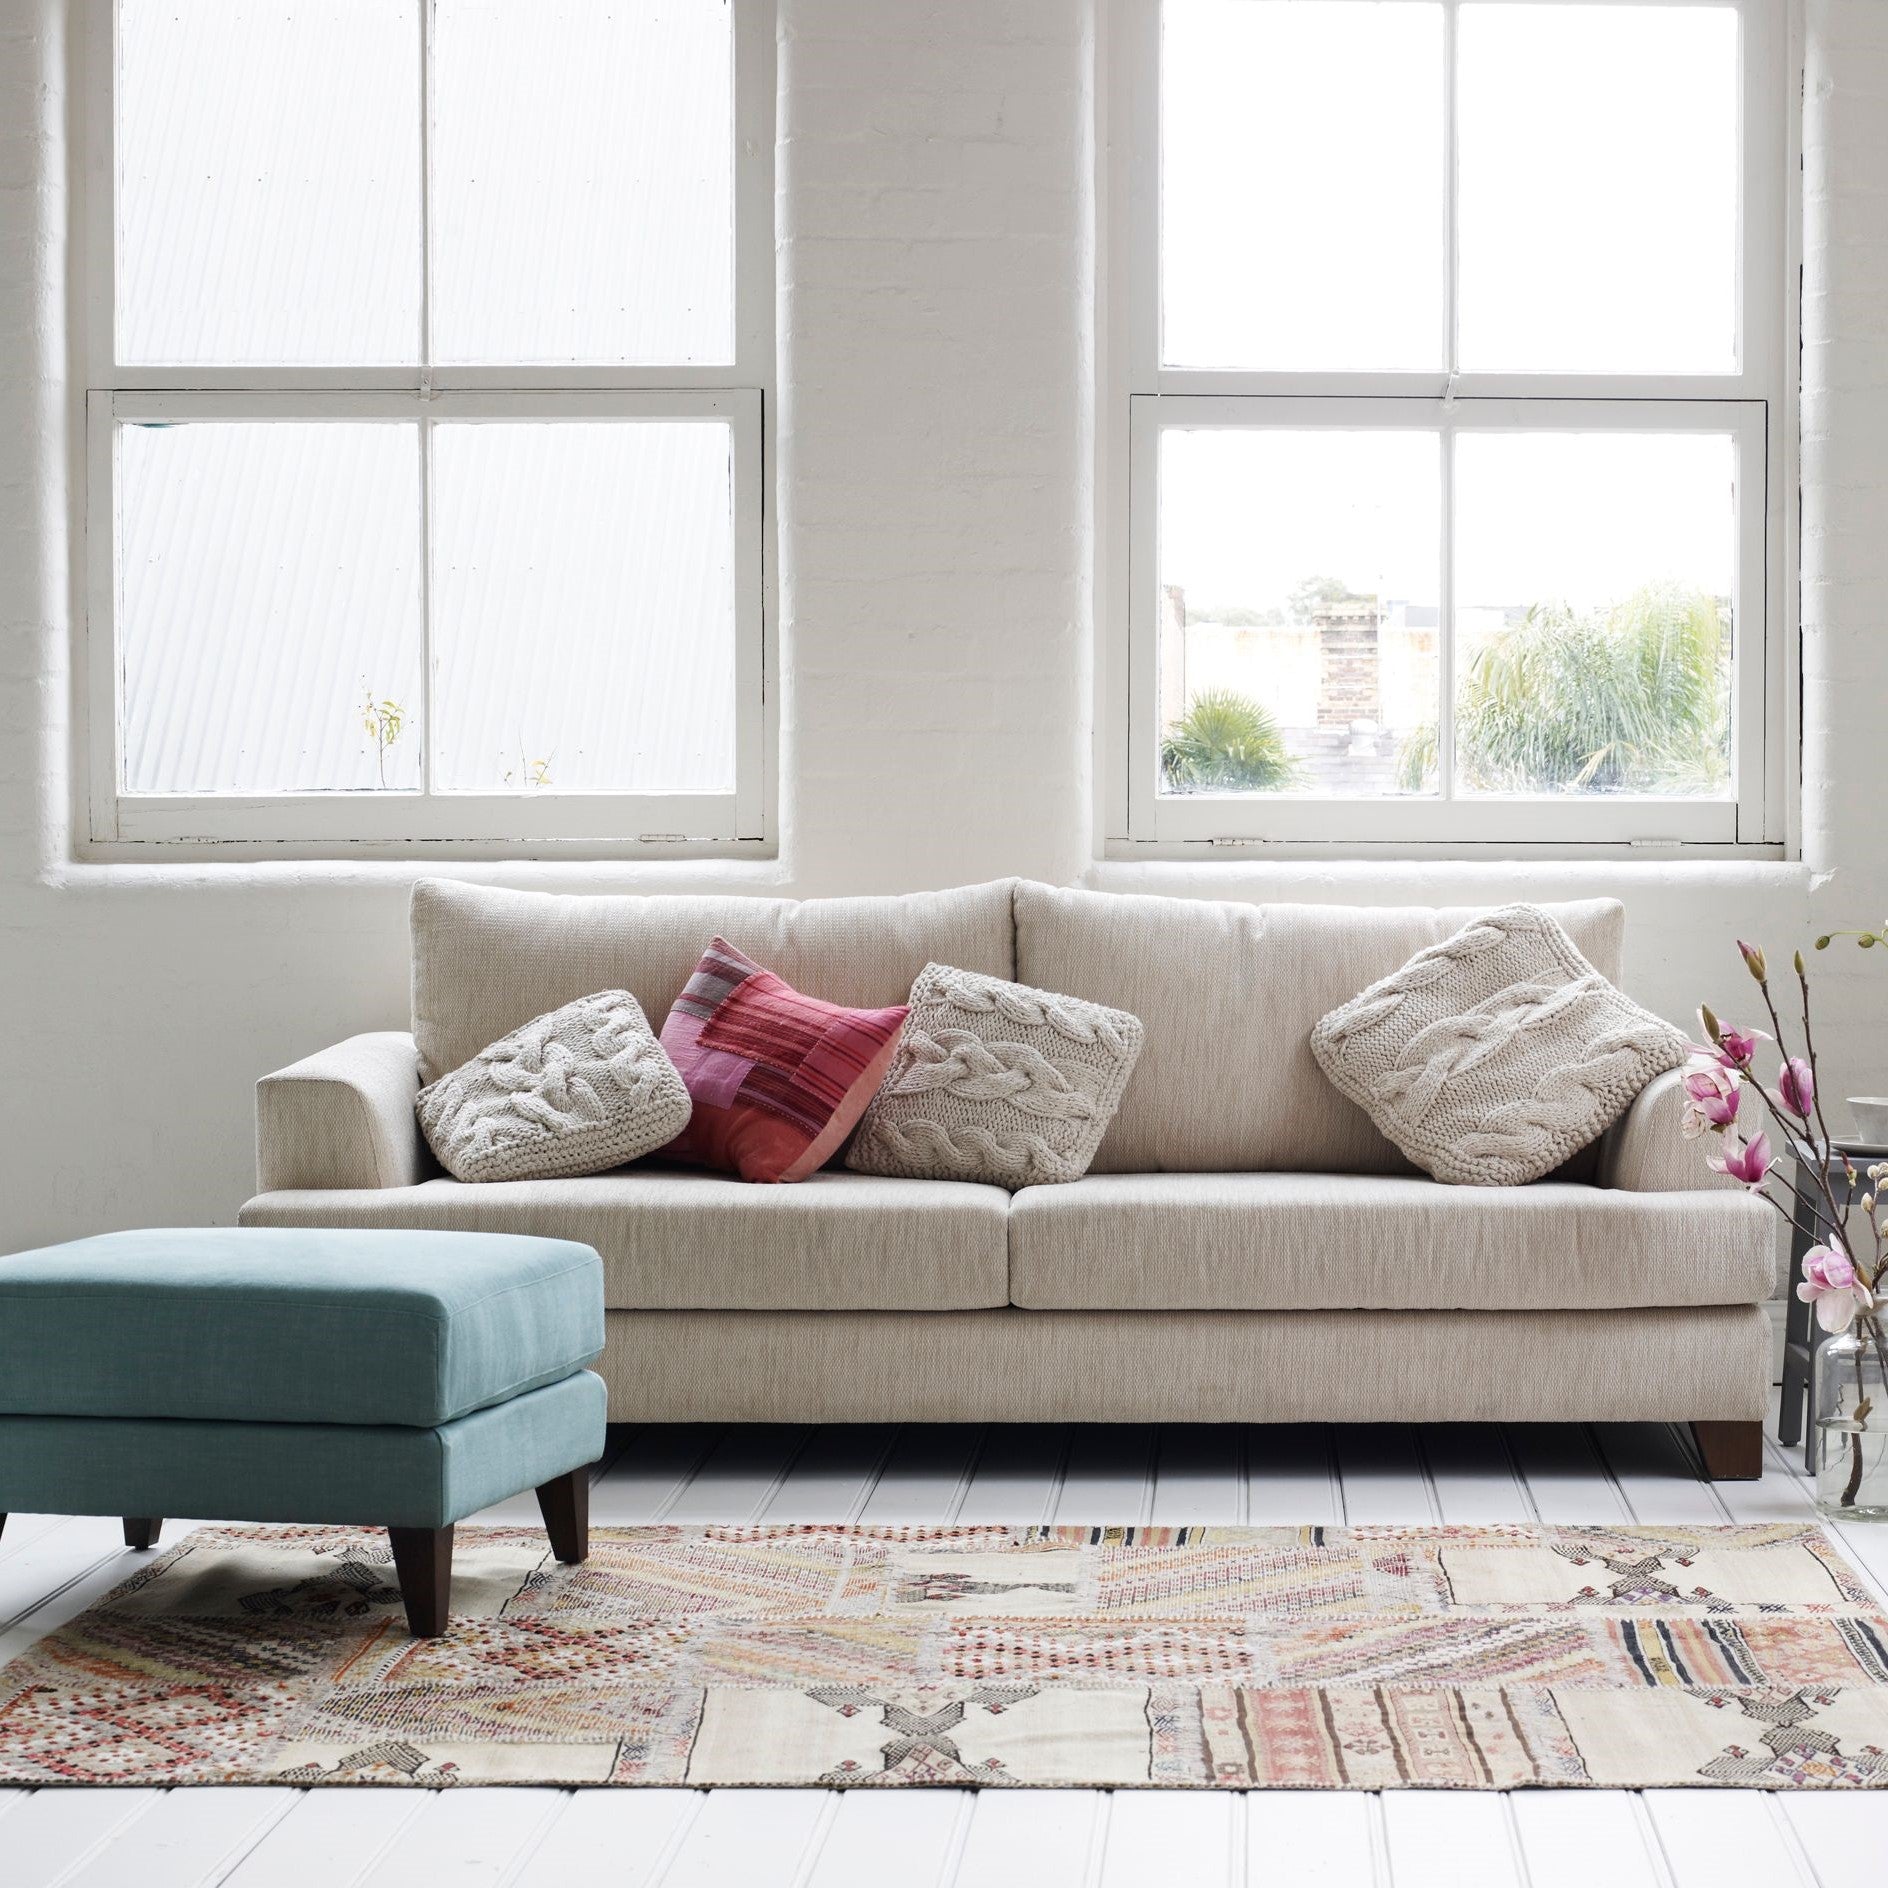 Kirby Sofa by Molmic available from Make Your House A Home, Furniture Store located in Bendigo, Victoria. Australian Made in Melbourne. Benny Sofa Molmic.